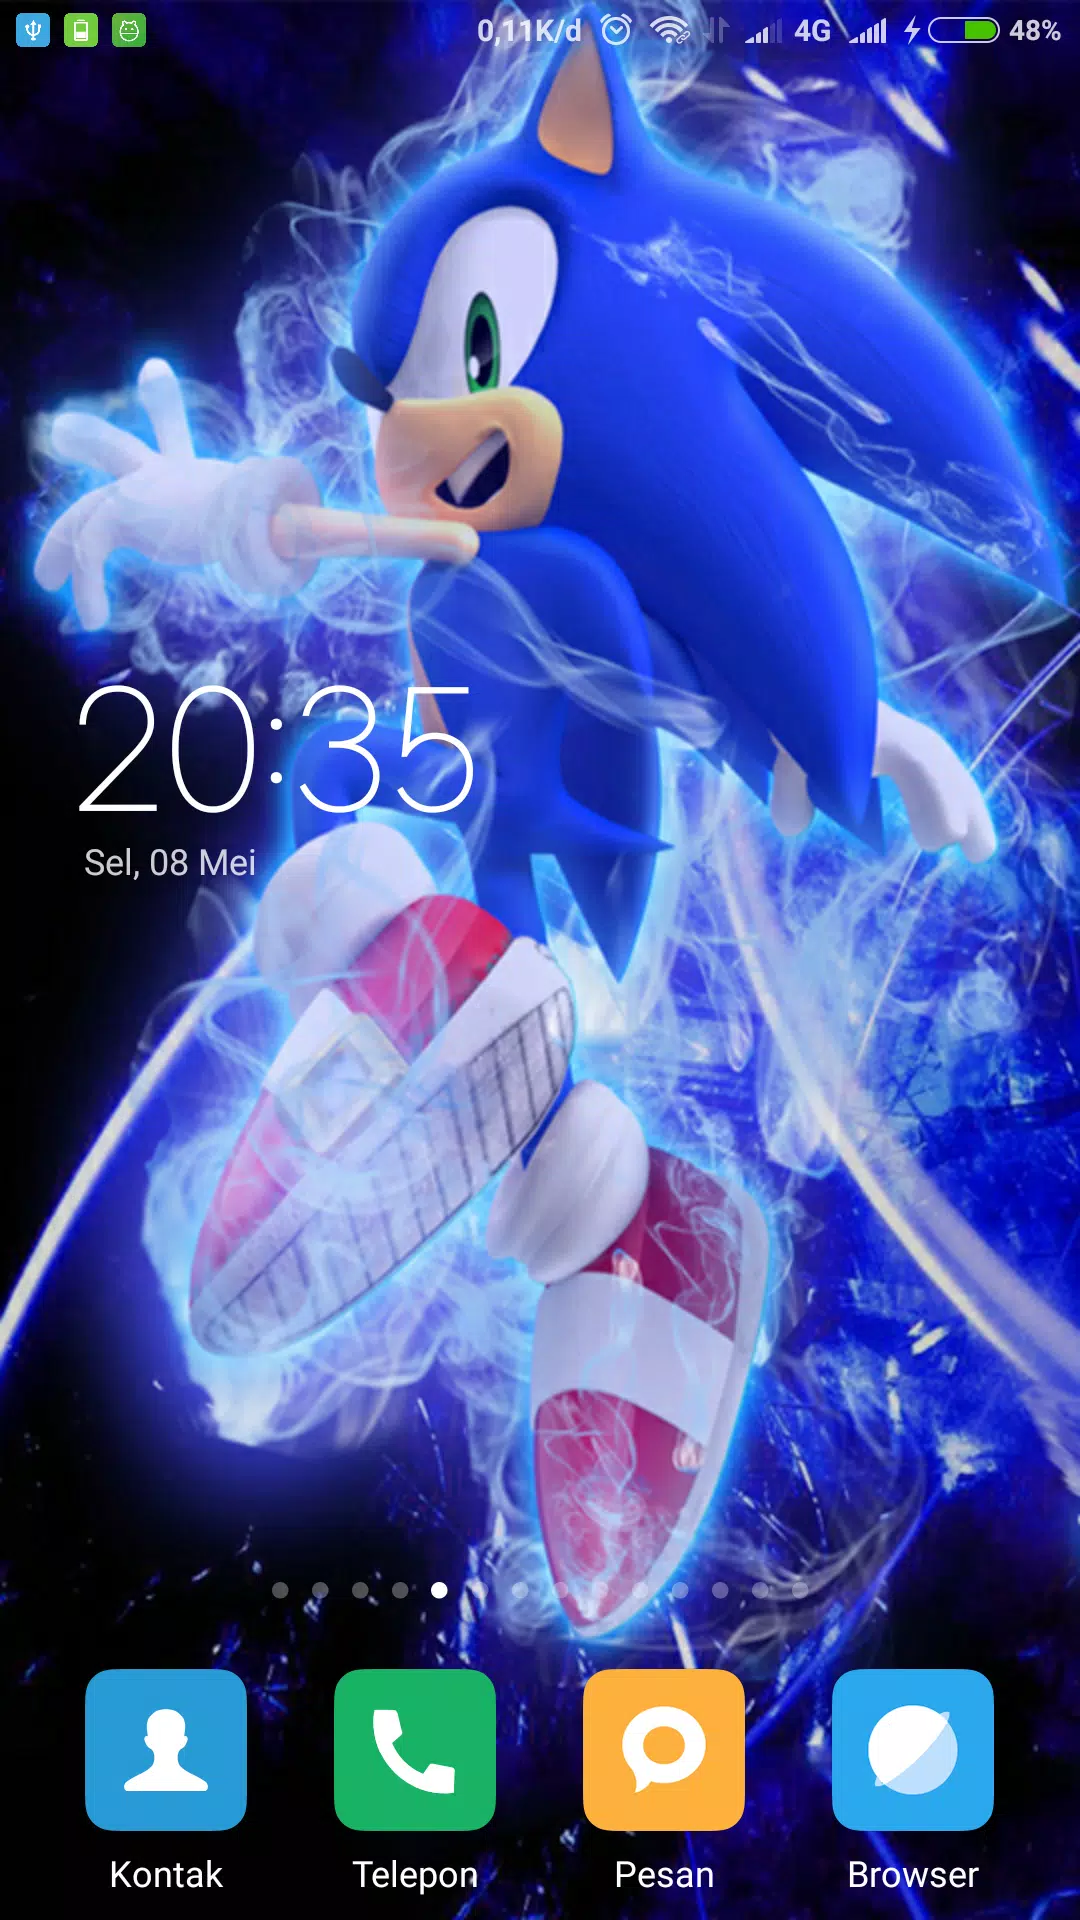 Sonic wallpaper hd apk for android download